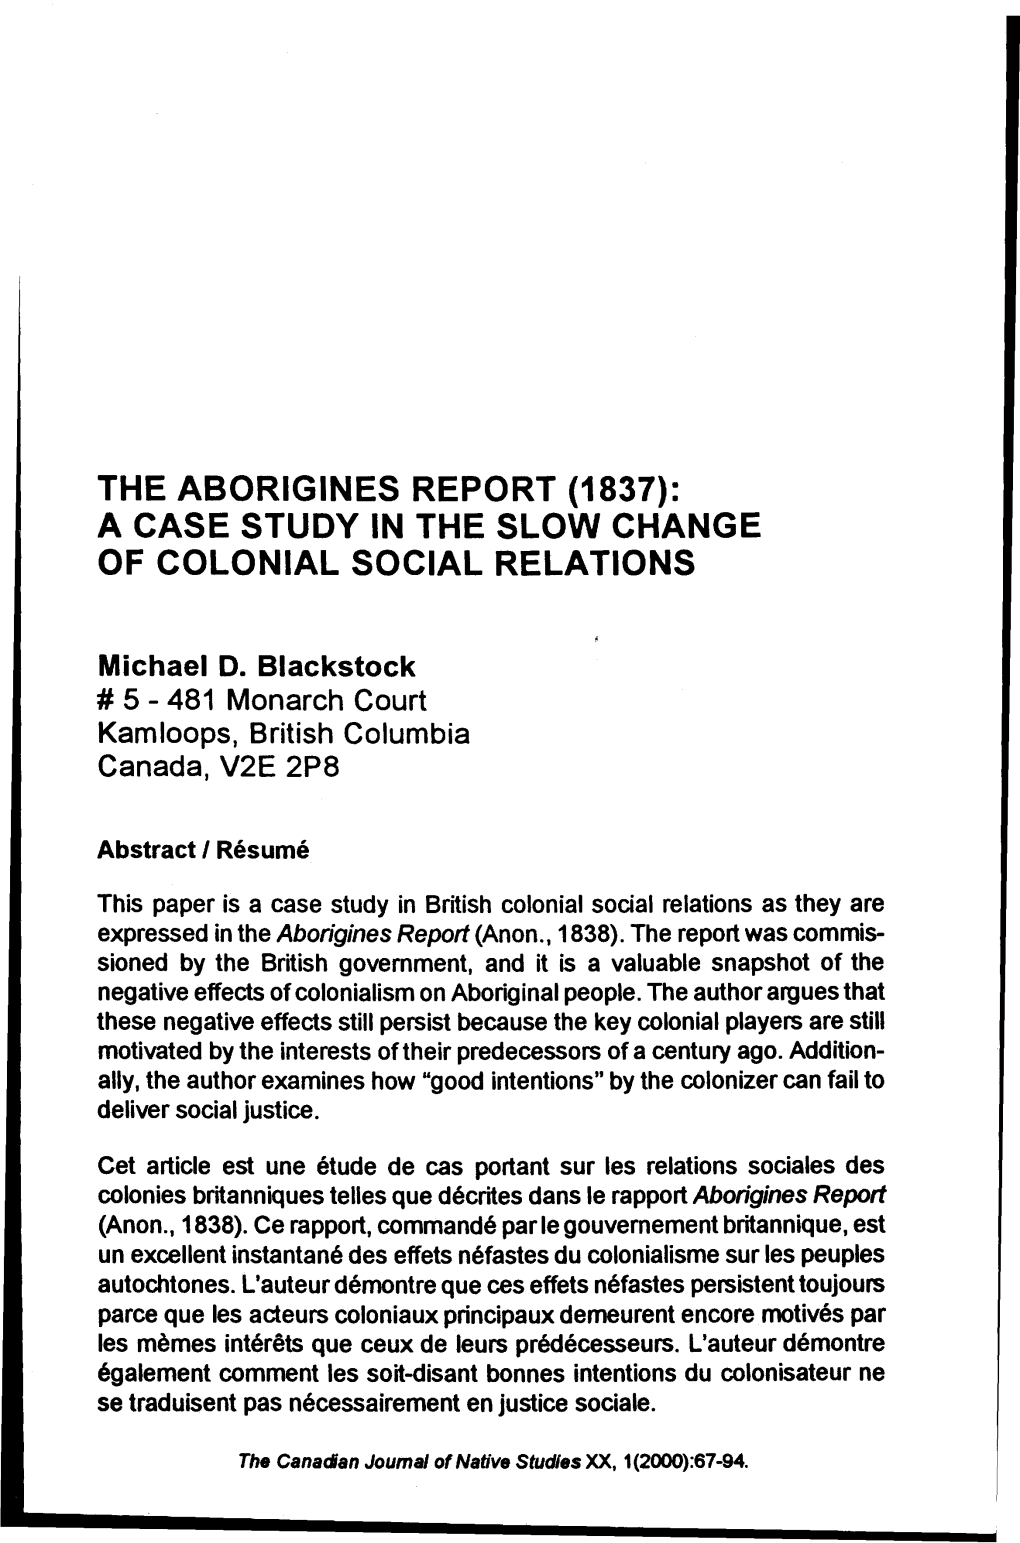 The Aborigines Report (1837): a Case Study in the Slow Change of Colonial Social Relations